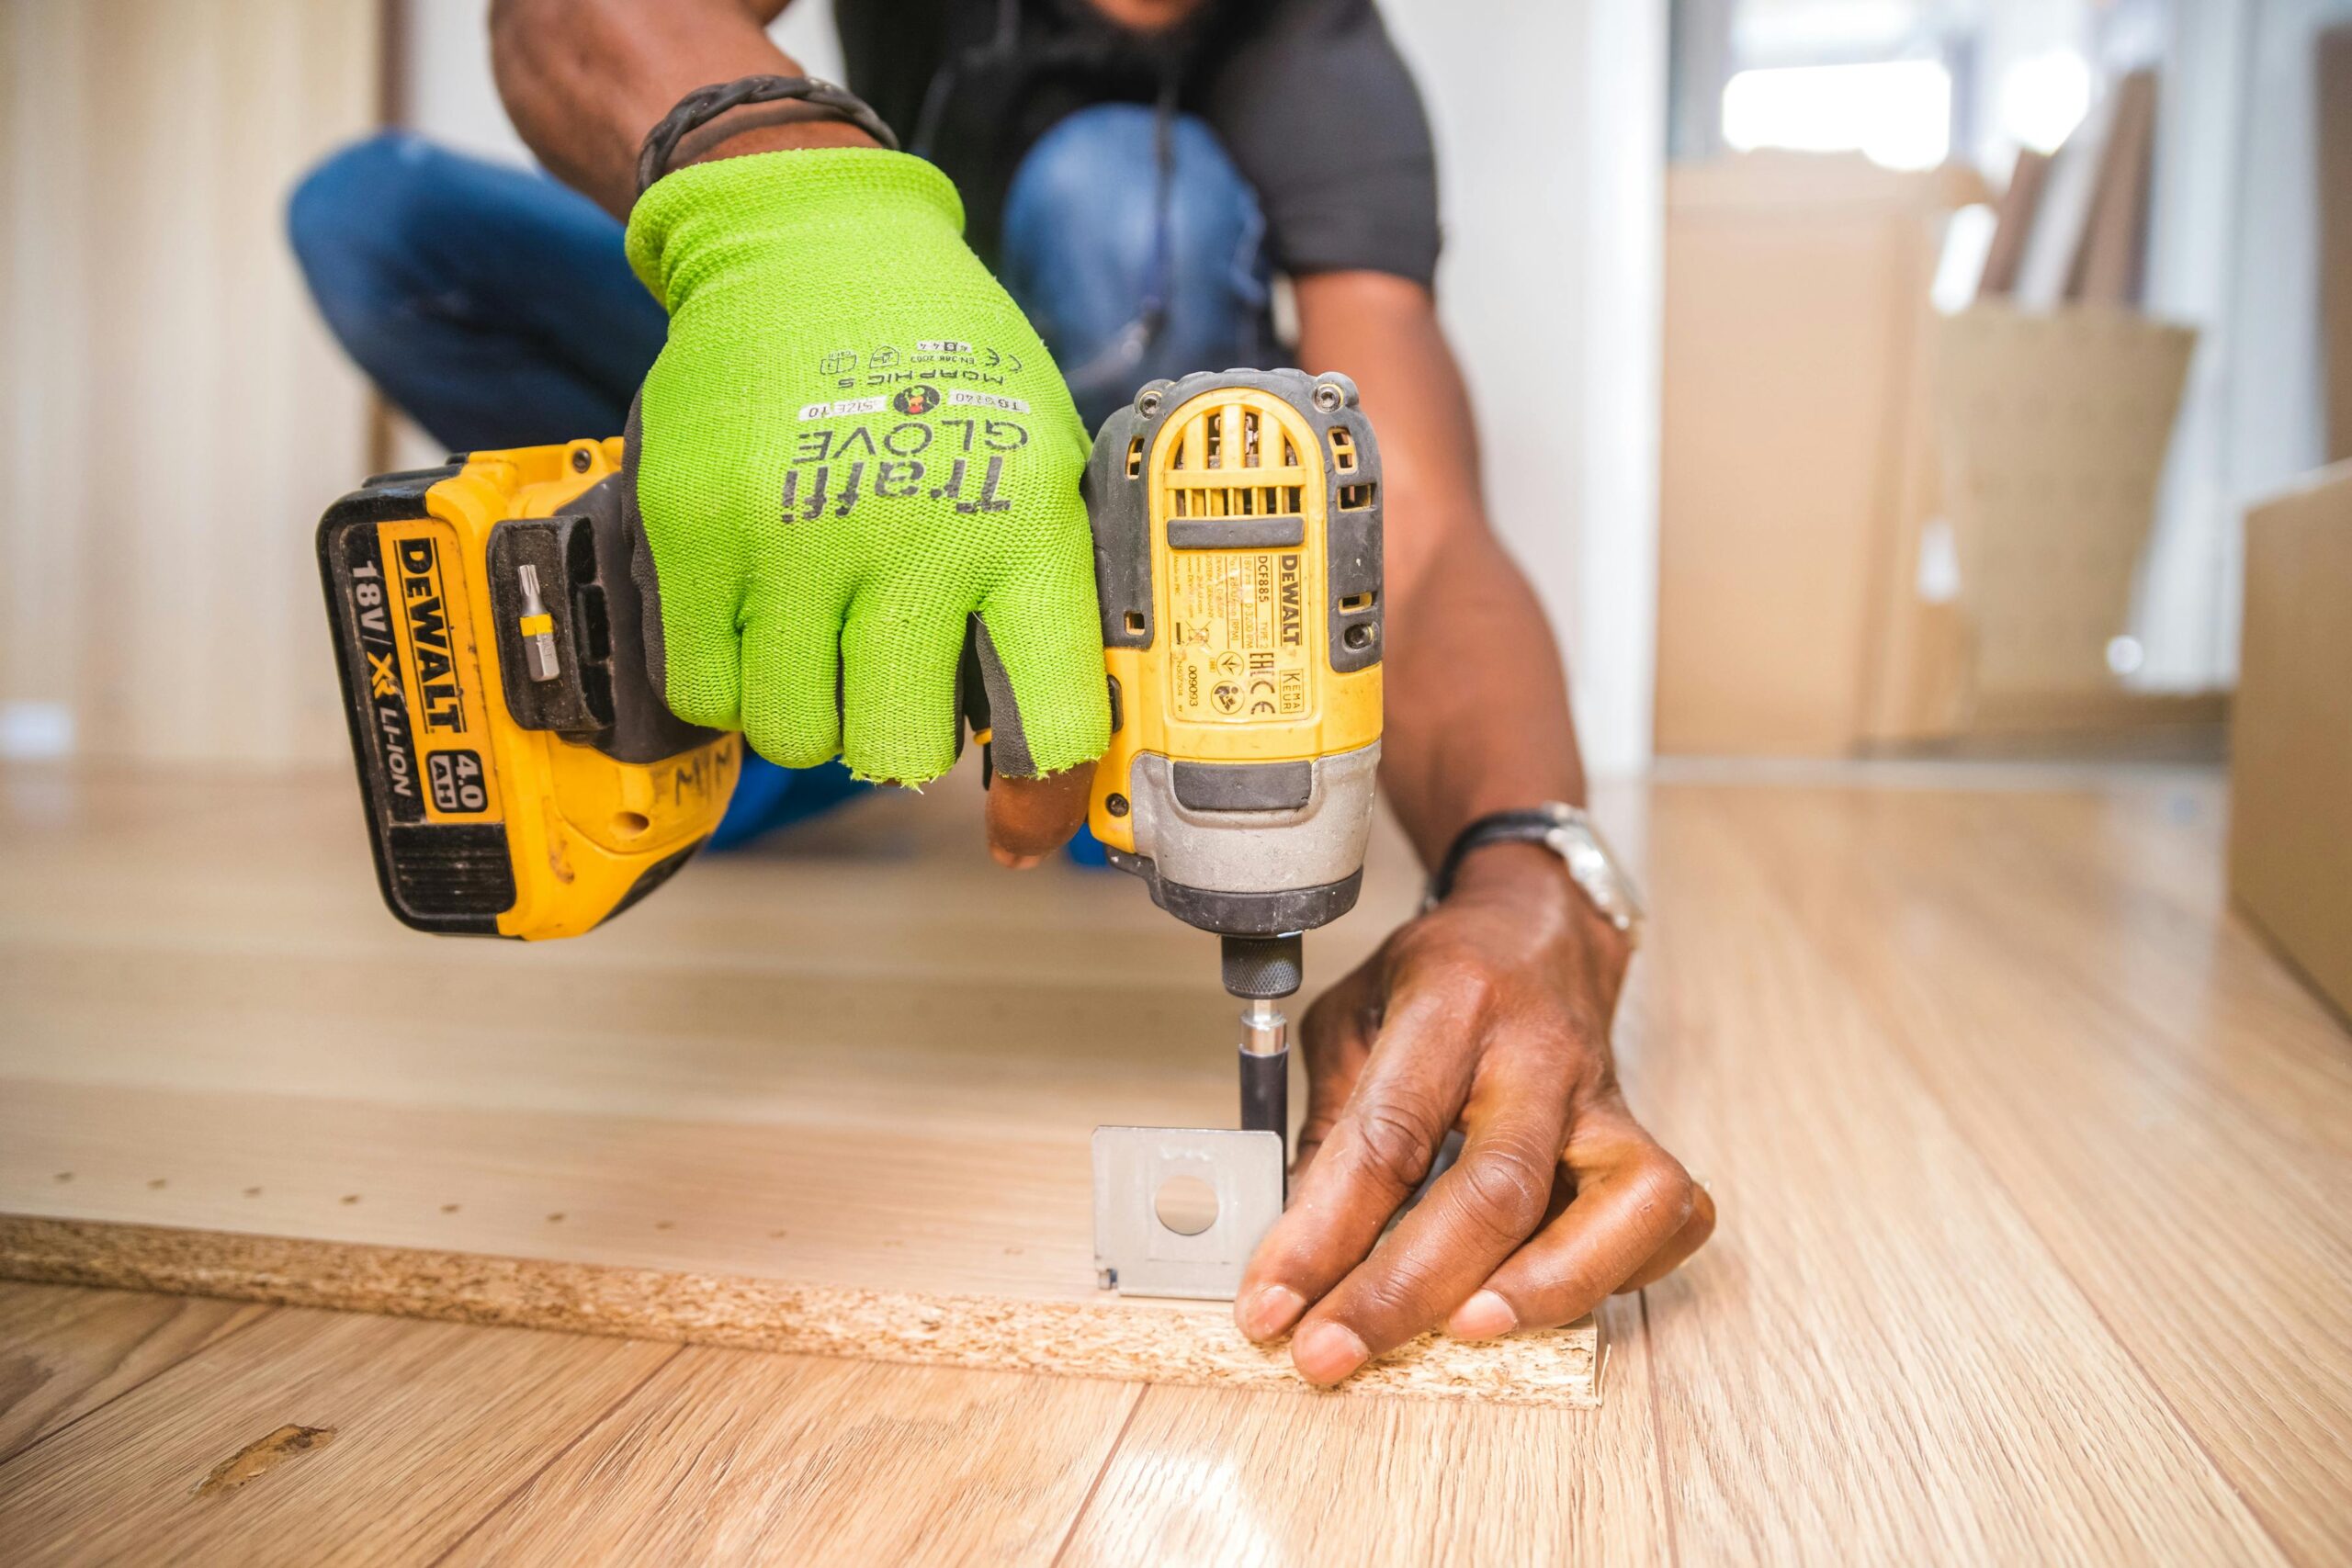 Instead of hiring professionals for every home repair or maintenance task, consider doing some of the work yourself. Learn basic skills like fixing a leaky faucet, changing air filters, or painting a room. Not only will you save money on labor costs, but you’ll also gain a sense of accomplishment. :: Pexels